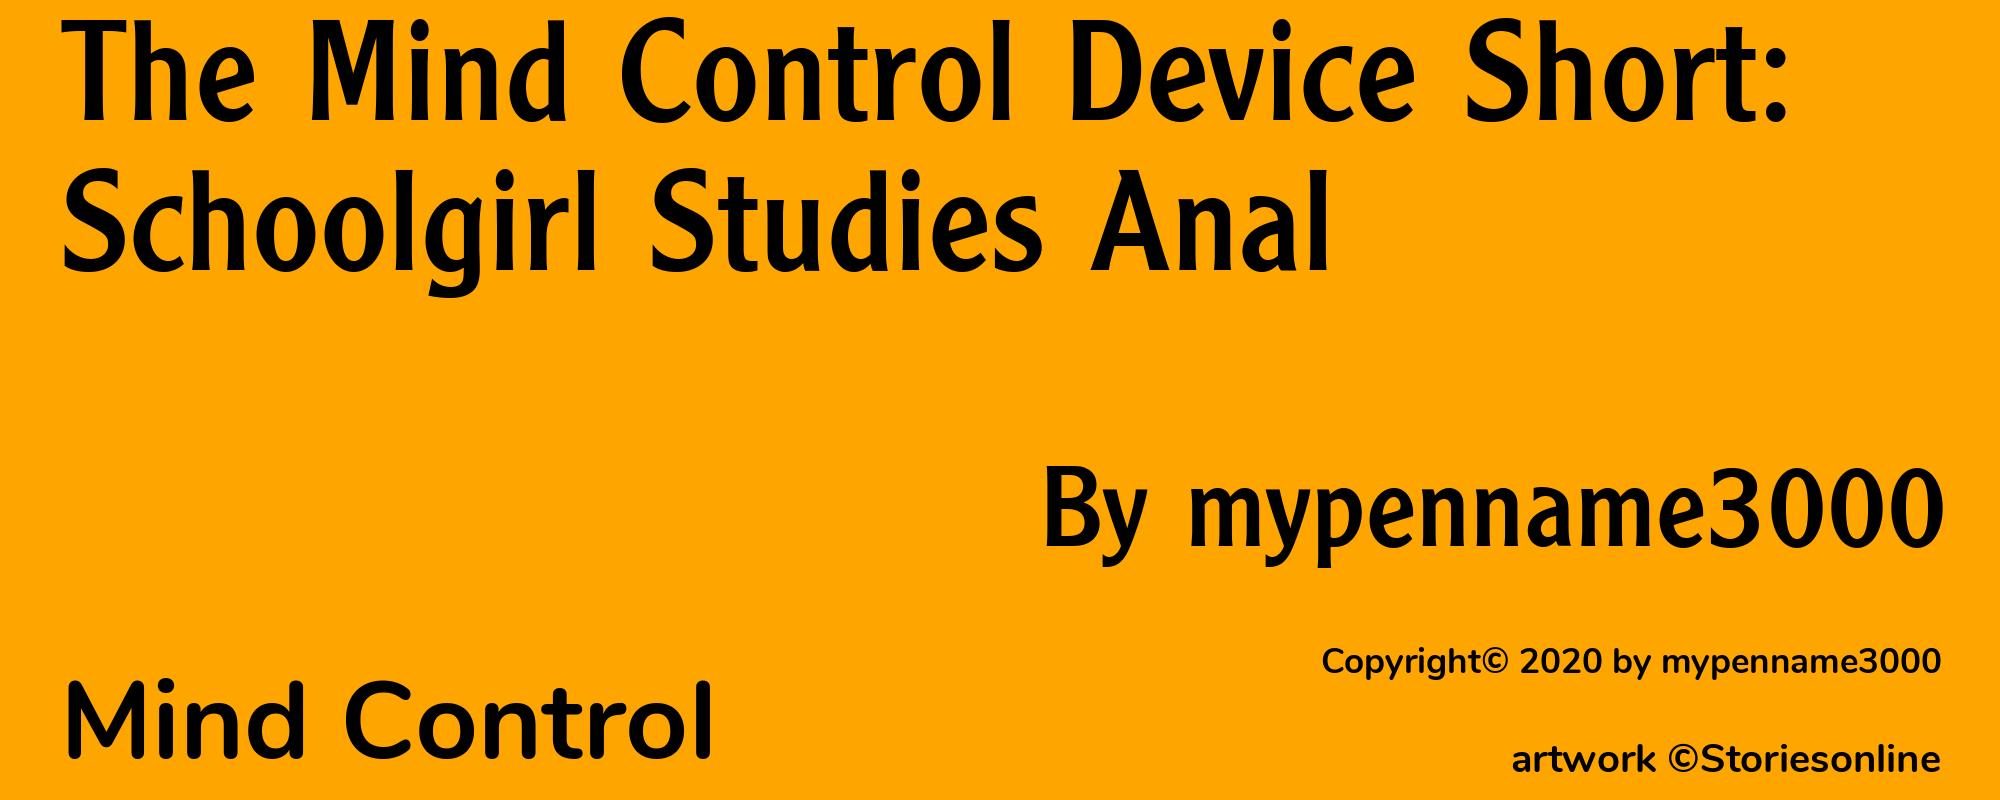 The Mind Control Device Short: Schoolgirl Studies Anal - Cover